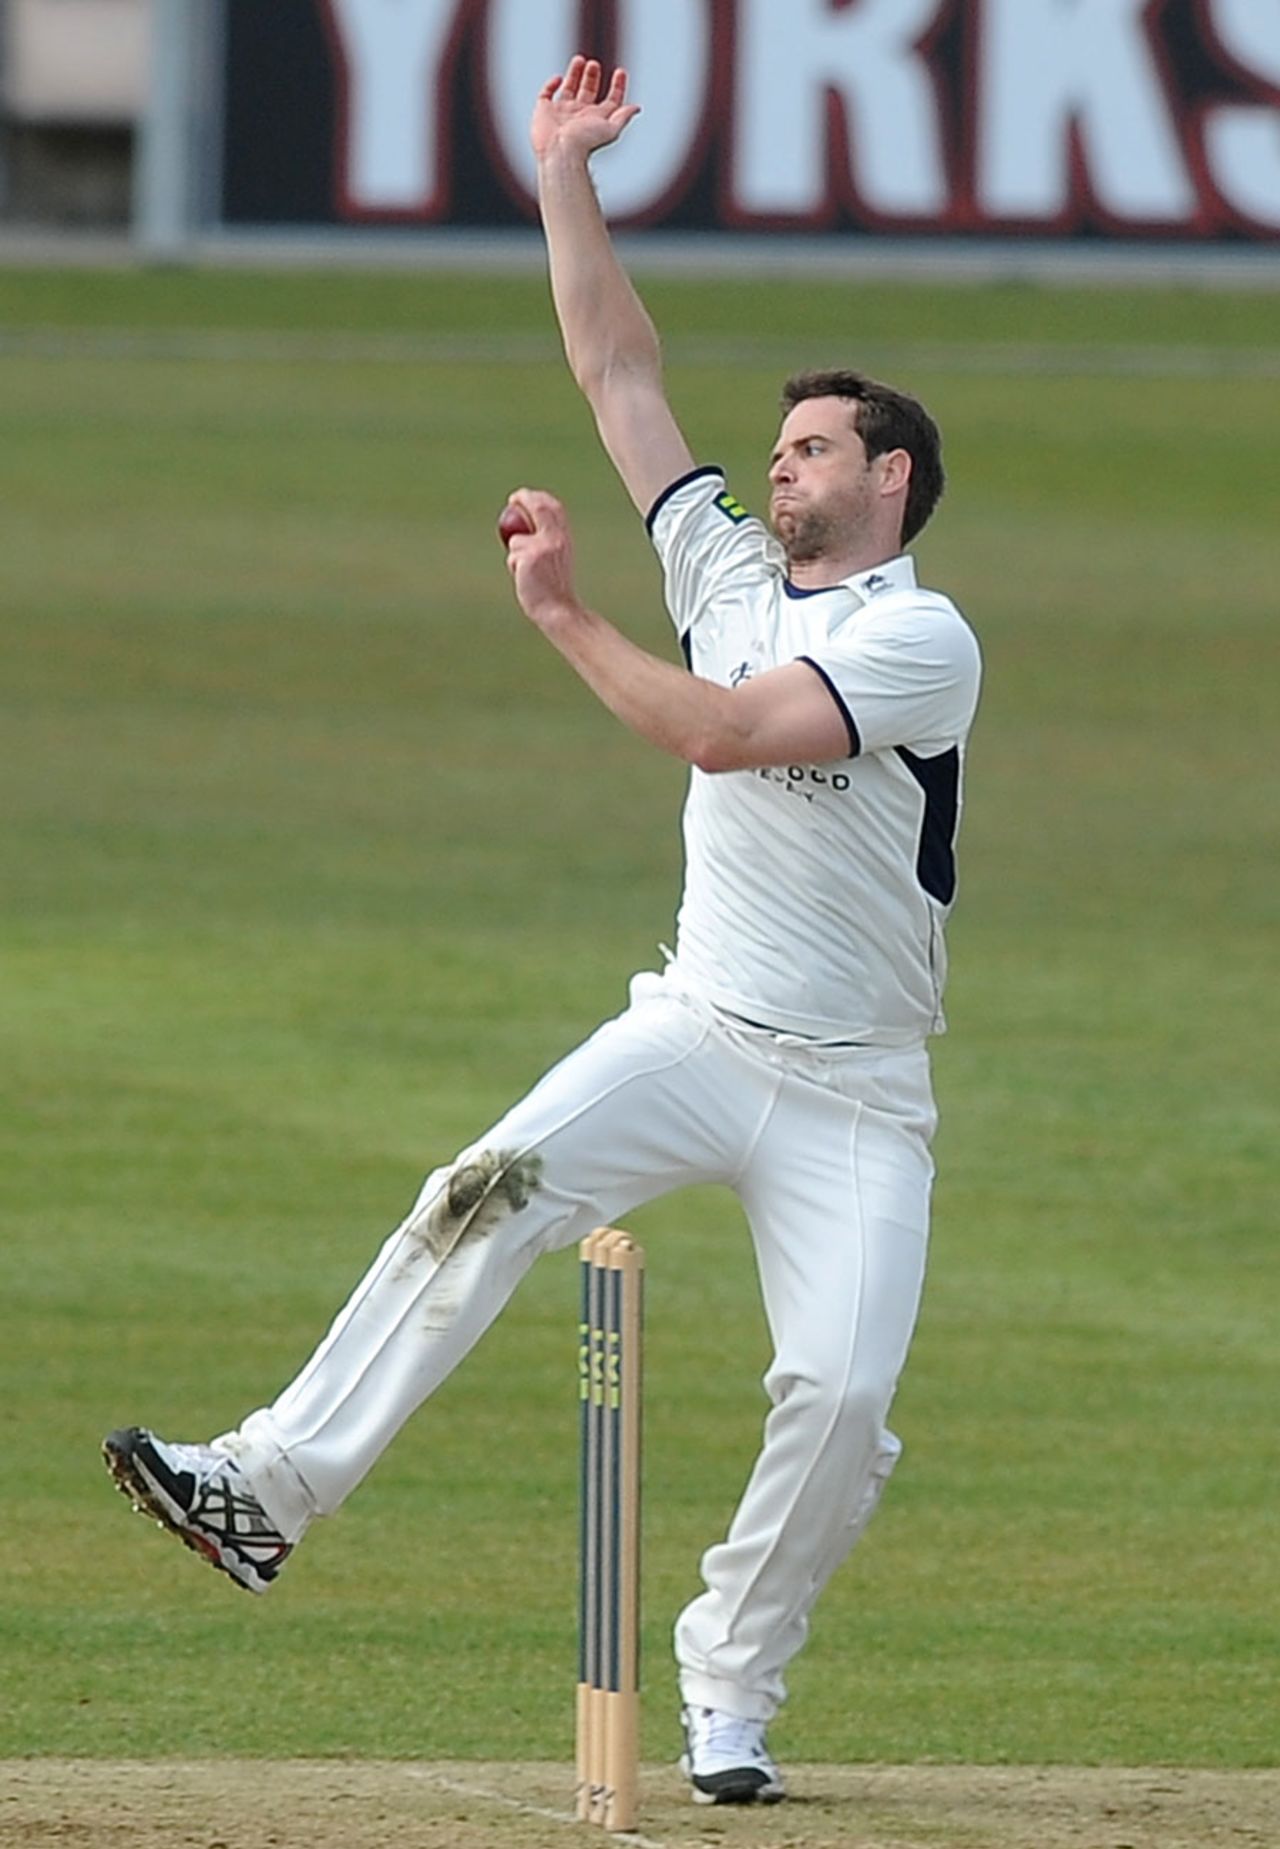 James Tomlinson took three early wickets, Hampshire v Leicestershire, County Championship, Division Two, Ageas Bowl, 2nd day, April 11, 2013